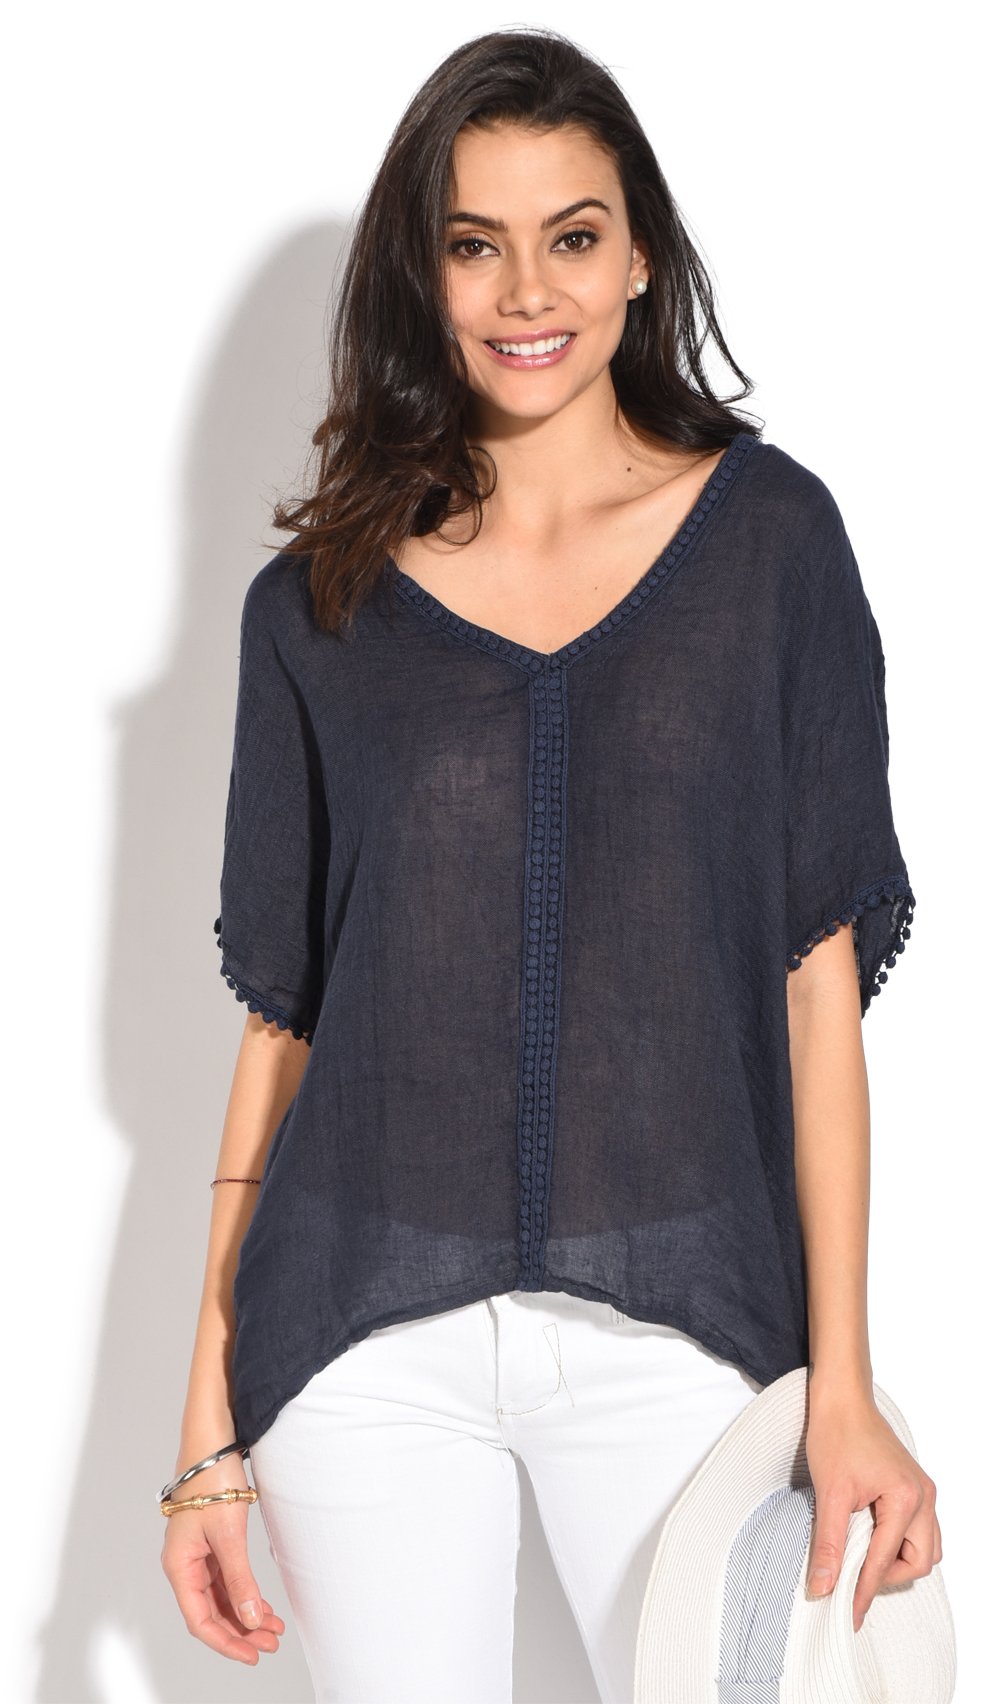 SEMI-TRANSPARENT TOP WITH V-NECK AND ENGLISH LACE